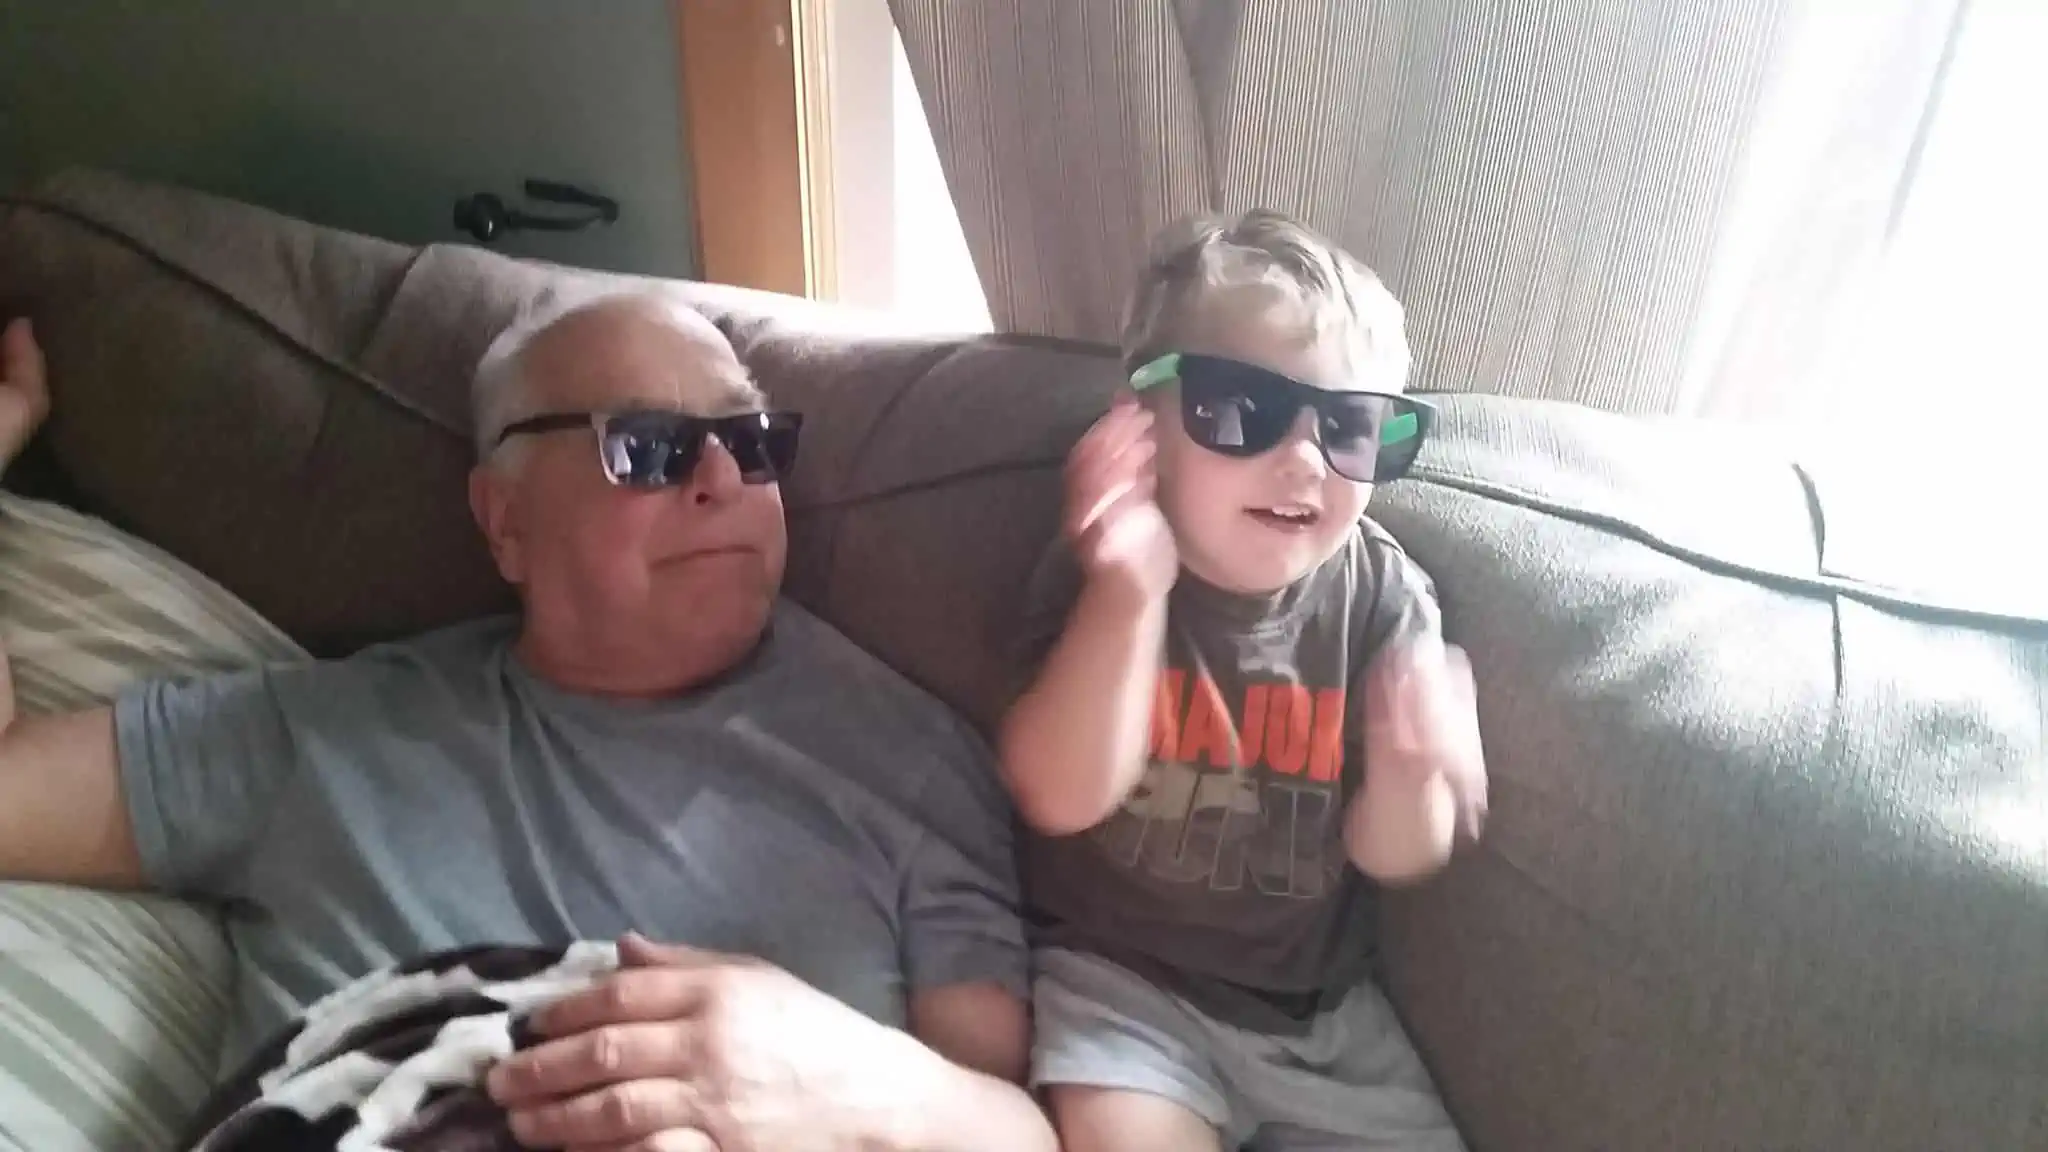 Grandson and great-grandfather wearing matching sunglasses and smiling together.